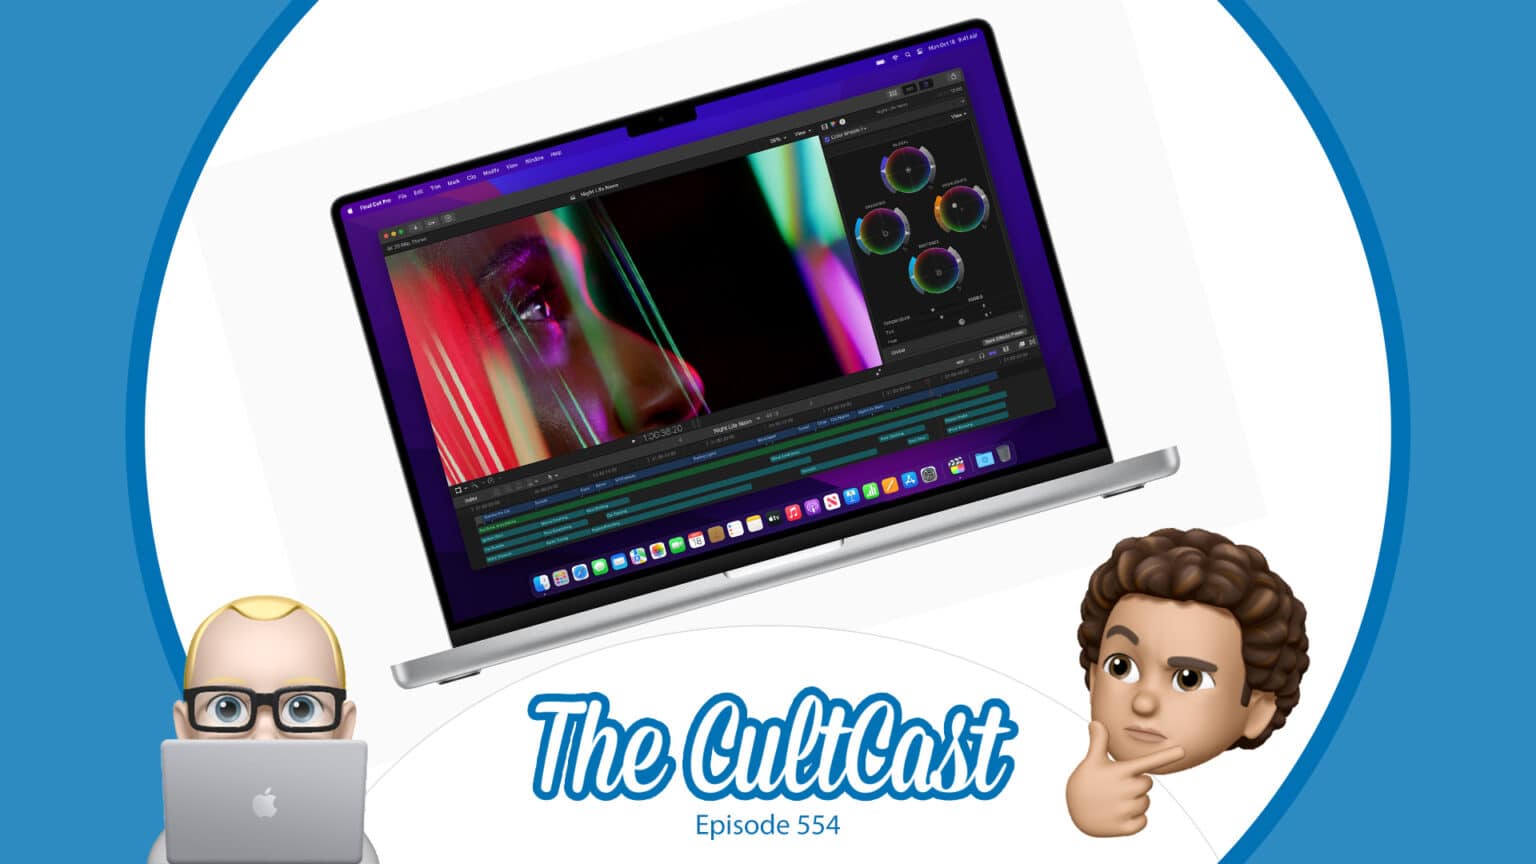 The CultCast Apple podcast: With Apple cranking out new chips for its Mac lineup, it gets harder to decide when to upgrade.